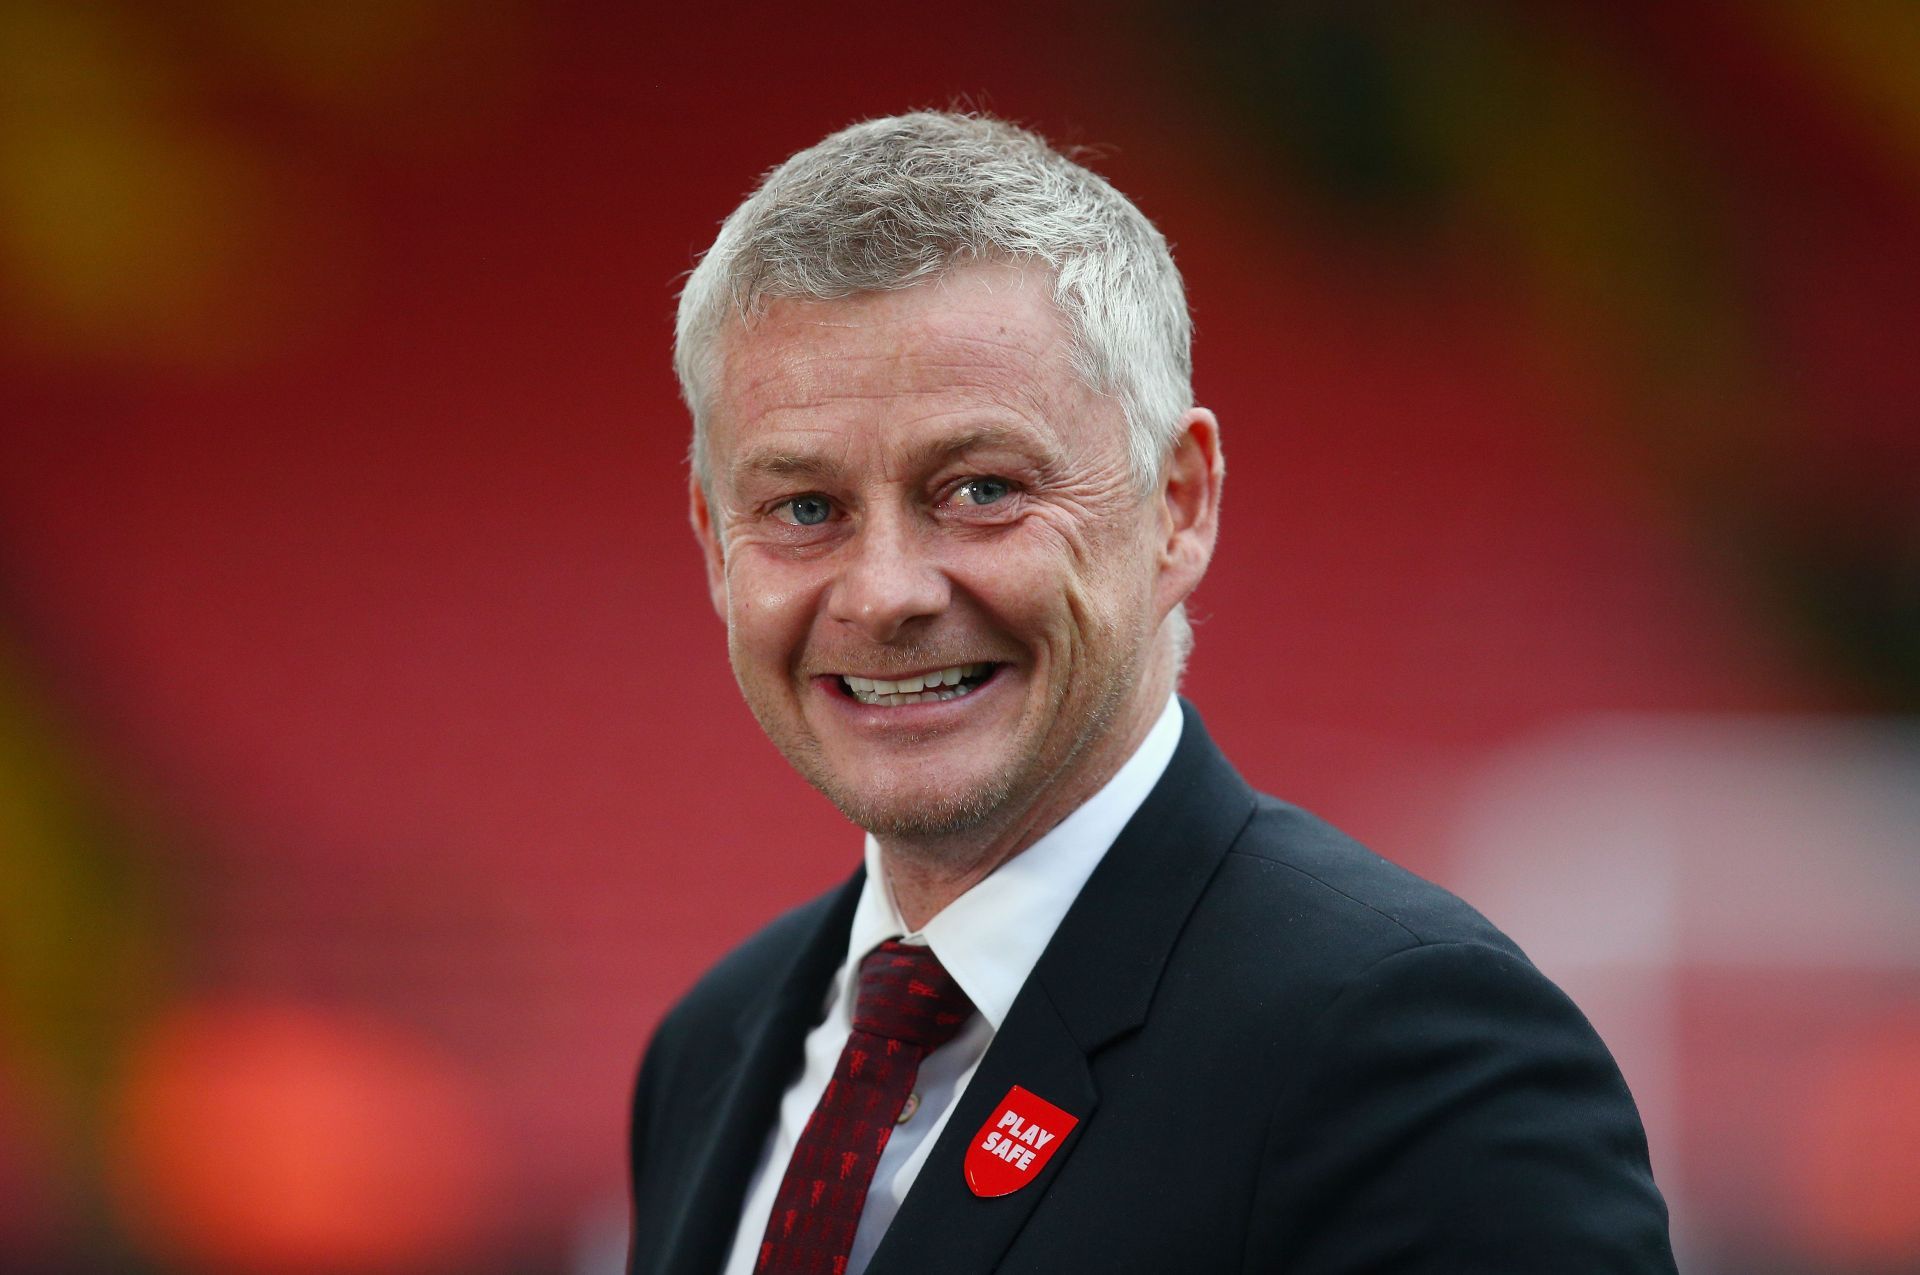 Ole Gunnar Solskjaer made a good start to life as Manchester United manager.